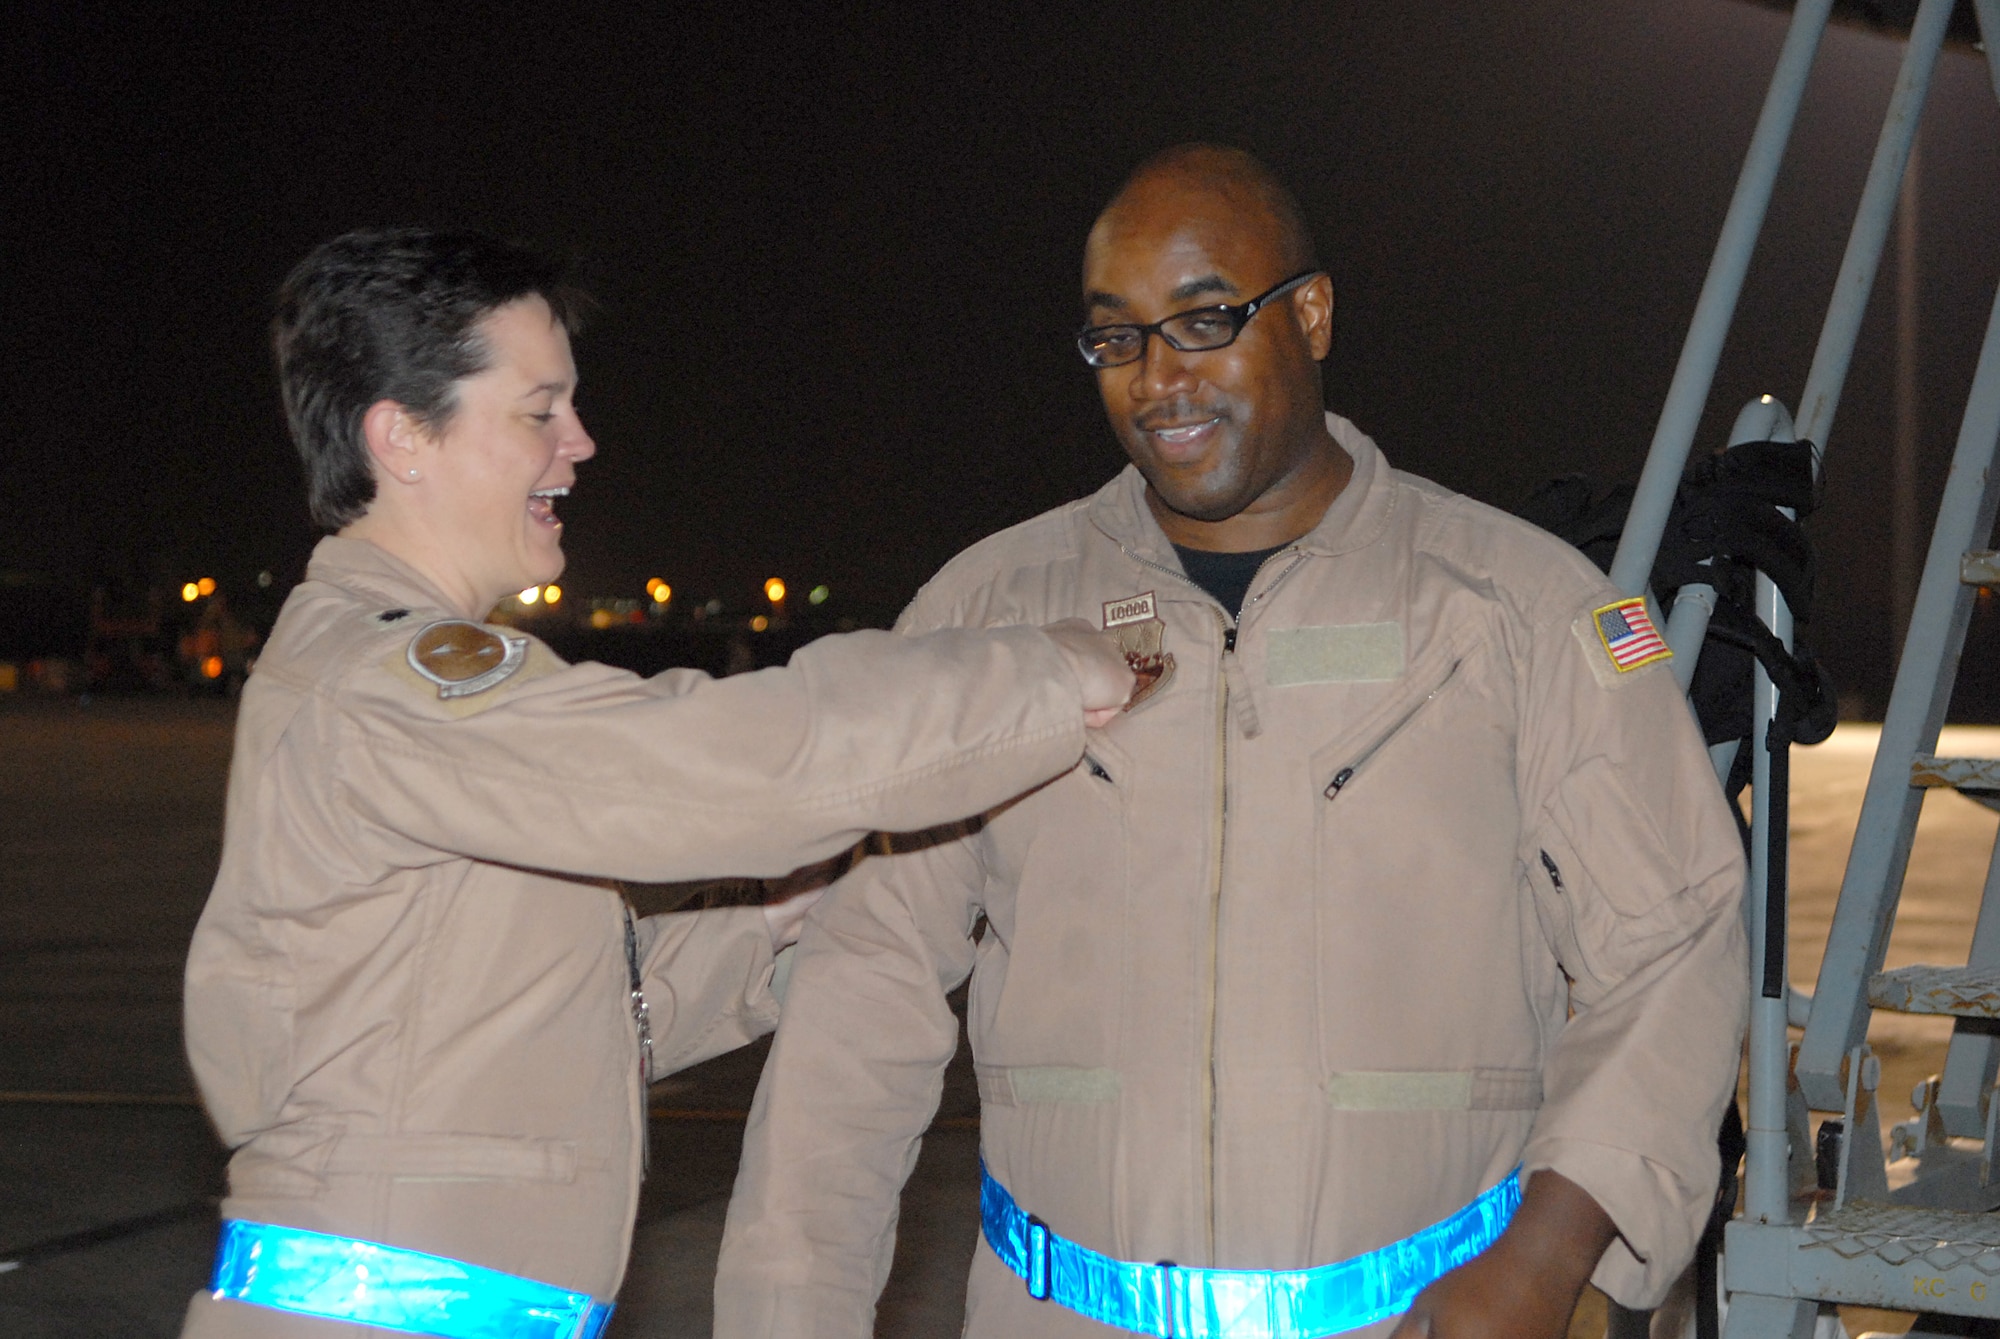 SOUTWEST ASIA - Master Sgt. Terence Jackson, 908 Expeditionary Air Refueling Squadron, receives a 10,000 flight patch from Lieutenant Colonel Jeanette Voigt, 908th EARS commander, Jan 23. As the flight engineer he is the expert for the aircraft systems on the airplane. Sergeant Jackson is deployed from the 305th Air Mobility Wing, McGuire AFB and is from Grand Rapids, Mich. (U.S. Air Force photo by Captain Jennifer M. Pearson) (Released)